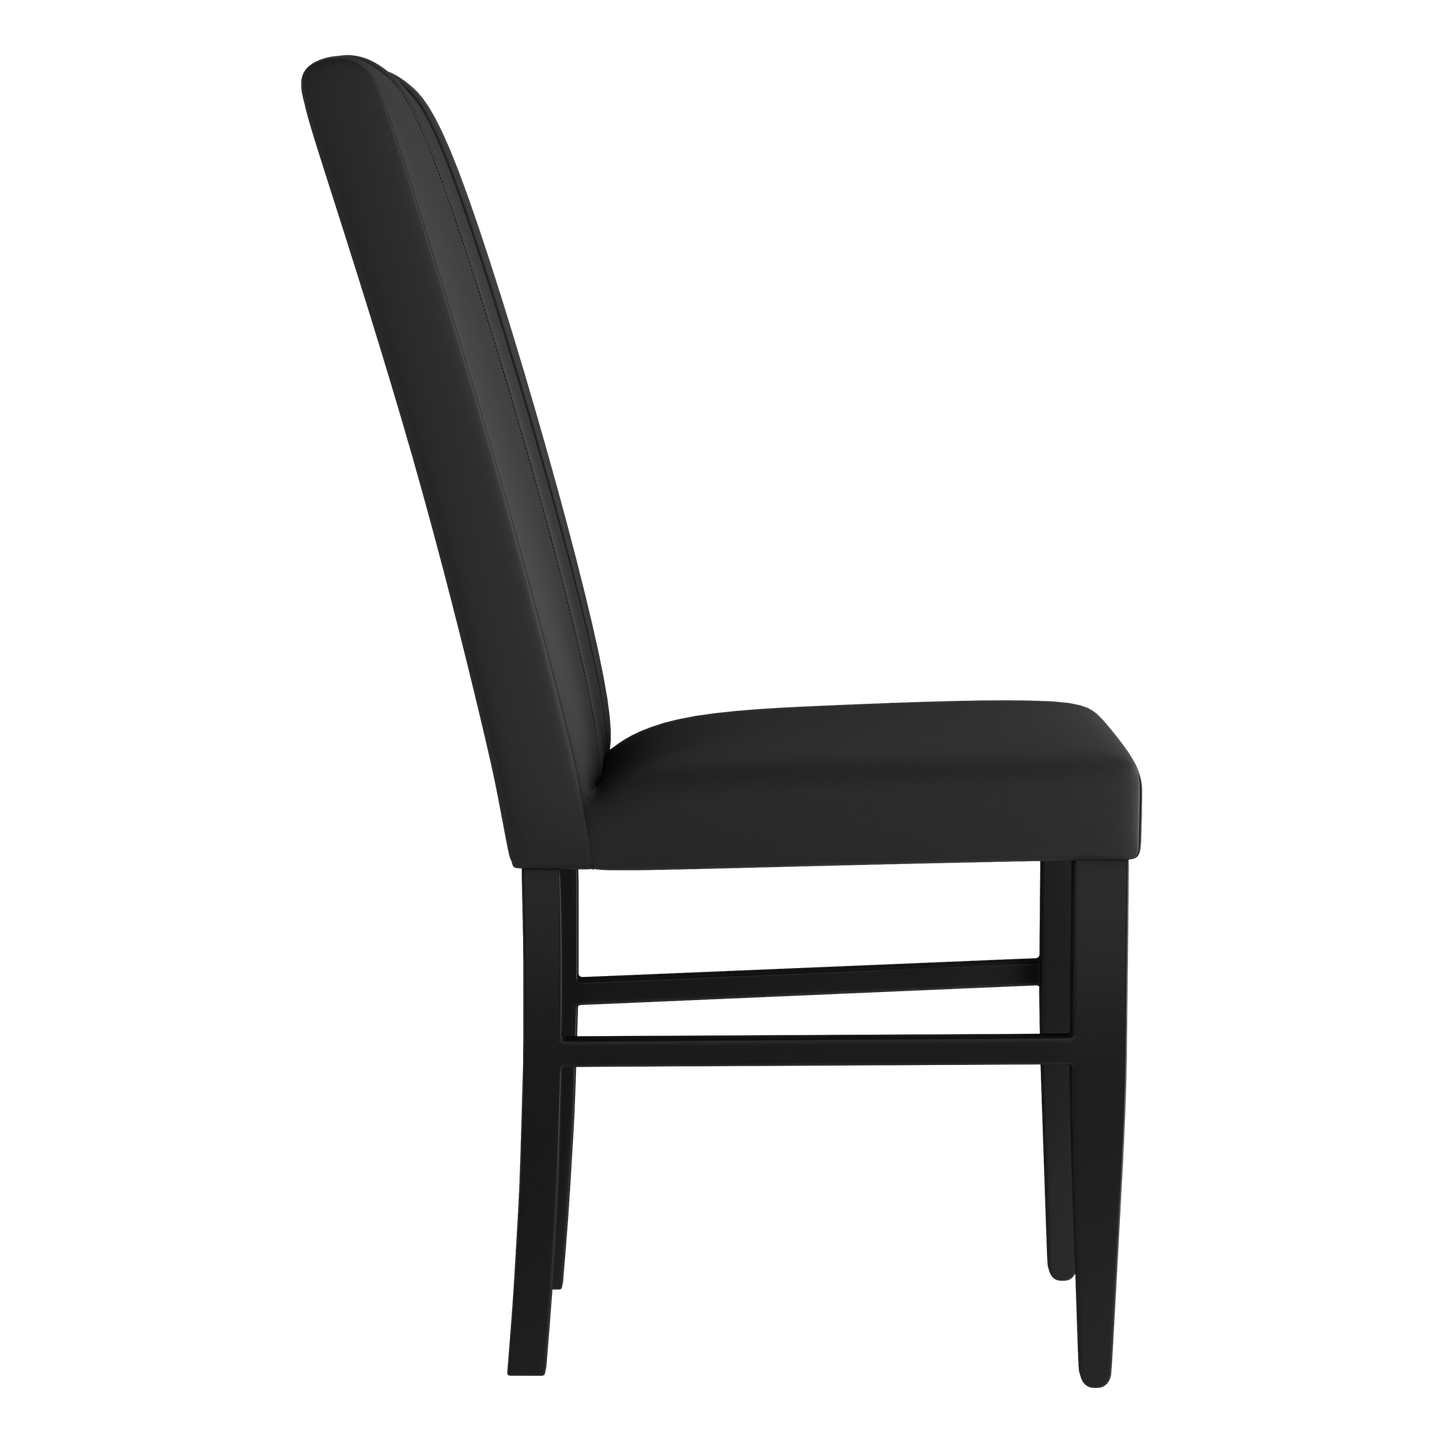 Side Chair 2000 with Columbus Crew Wordmark Logo Set of 2